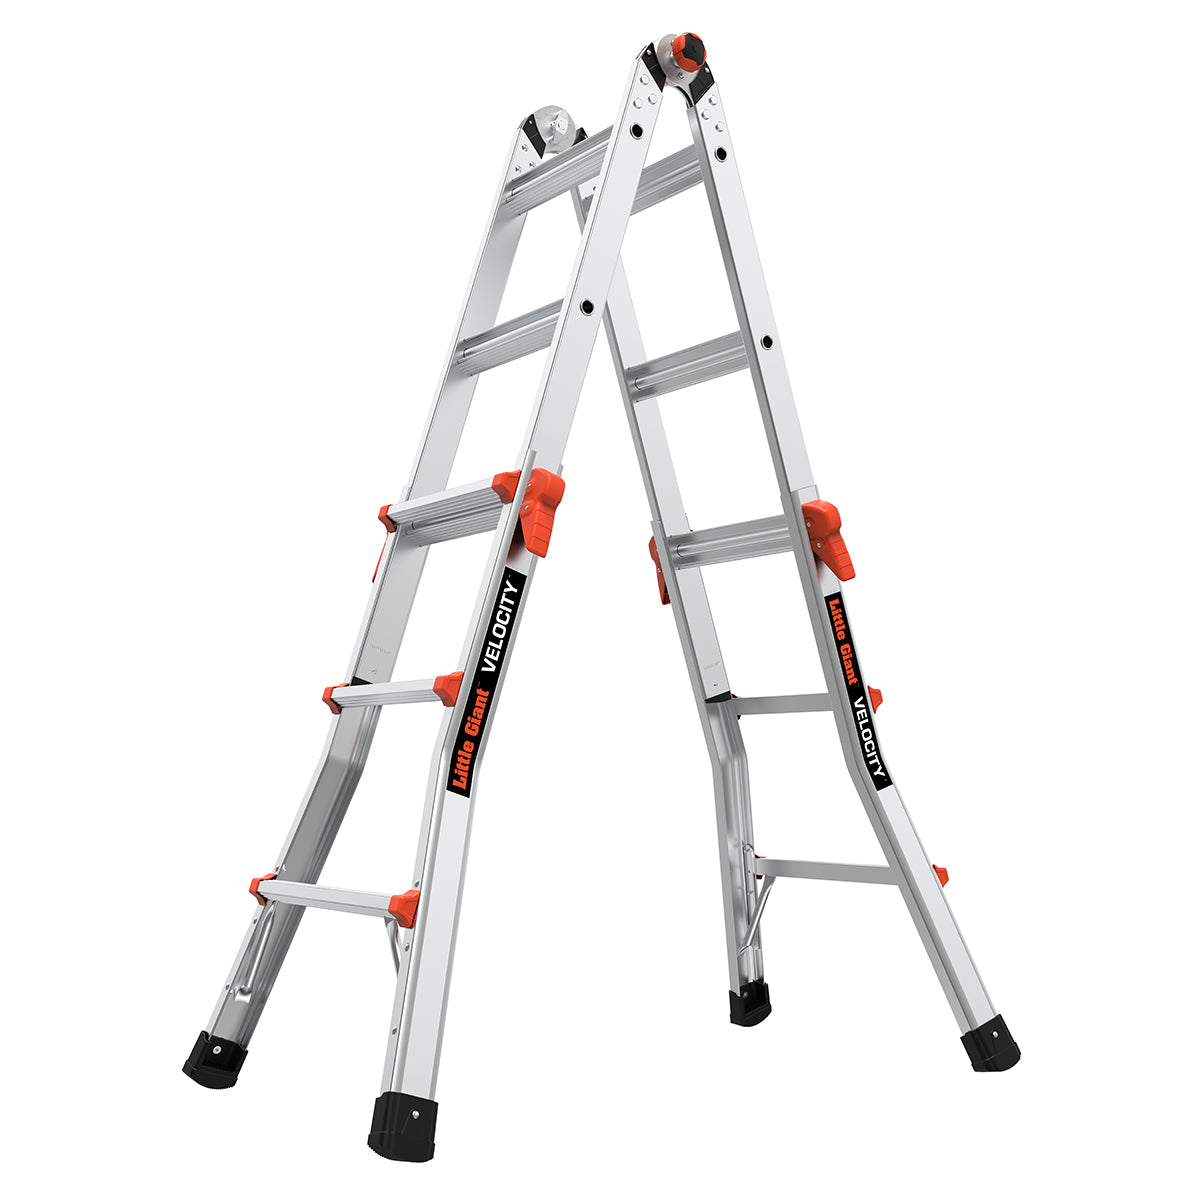 Little Giant 15413-303 - VELOCITY, Model 13 - CSA Grade IA - 300 lb/136 kg Rated, Aluminum Articulated Extendable Ladder